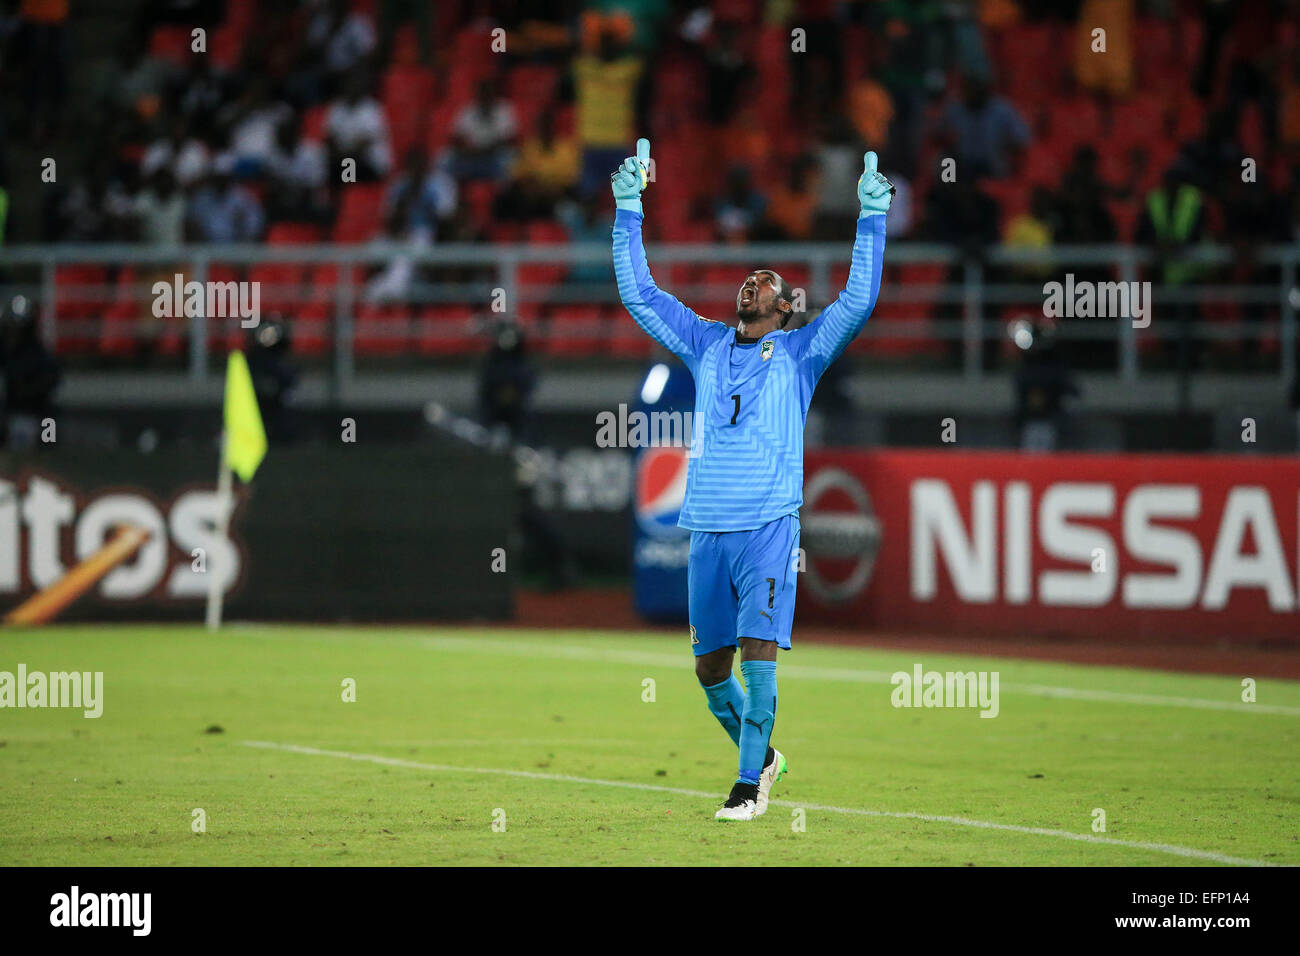 Bata, Equatorial Guinea. 8th Feb, 2015. Boubacar Barry, goalkeeper of Cote d'Ivoire, reacts during the penalty kicks of the final match of Africa Cup of Nations between Ghana and Cote d'Ivoire in Bata, Equatorial Guinea, Feb. 8, 2015. Cote d'Ivoire defeated Ghana by 9-8 after the extra time and penalty kicks and claimed the title. Credit:  Meng Chenguang/Xinhua/Alamy Live News Stock Photo